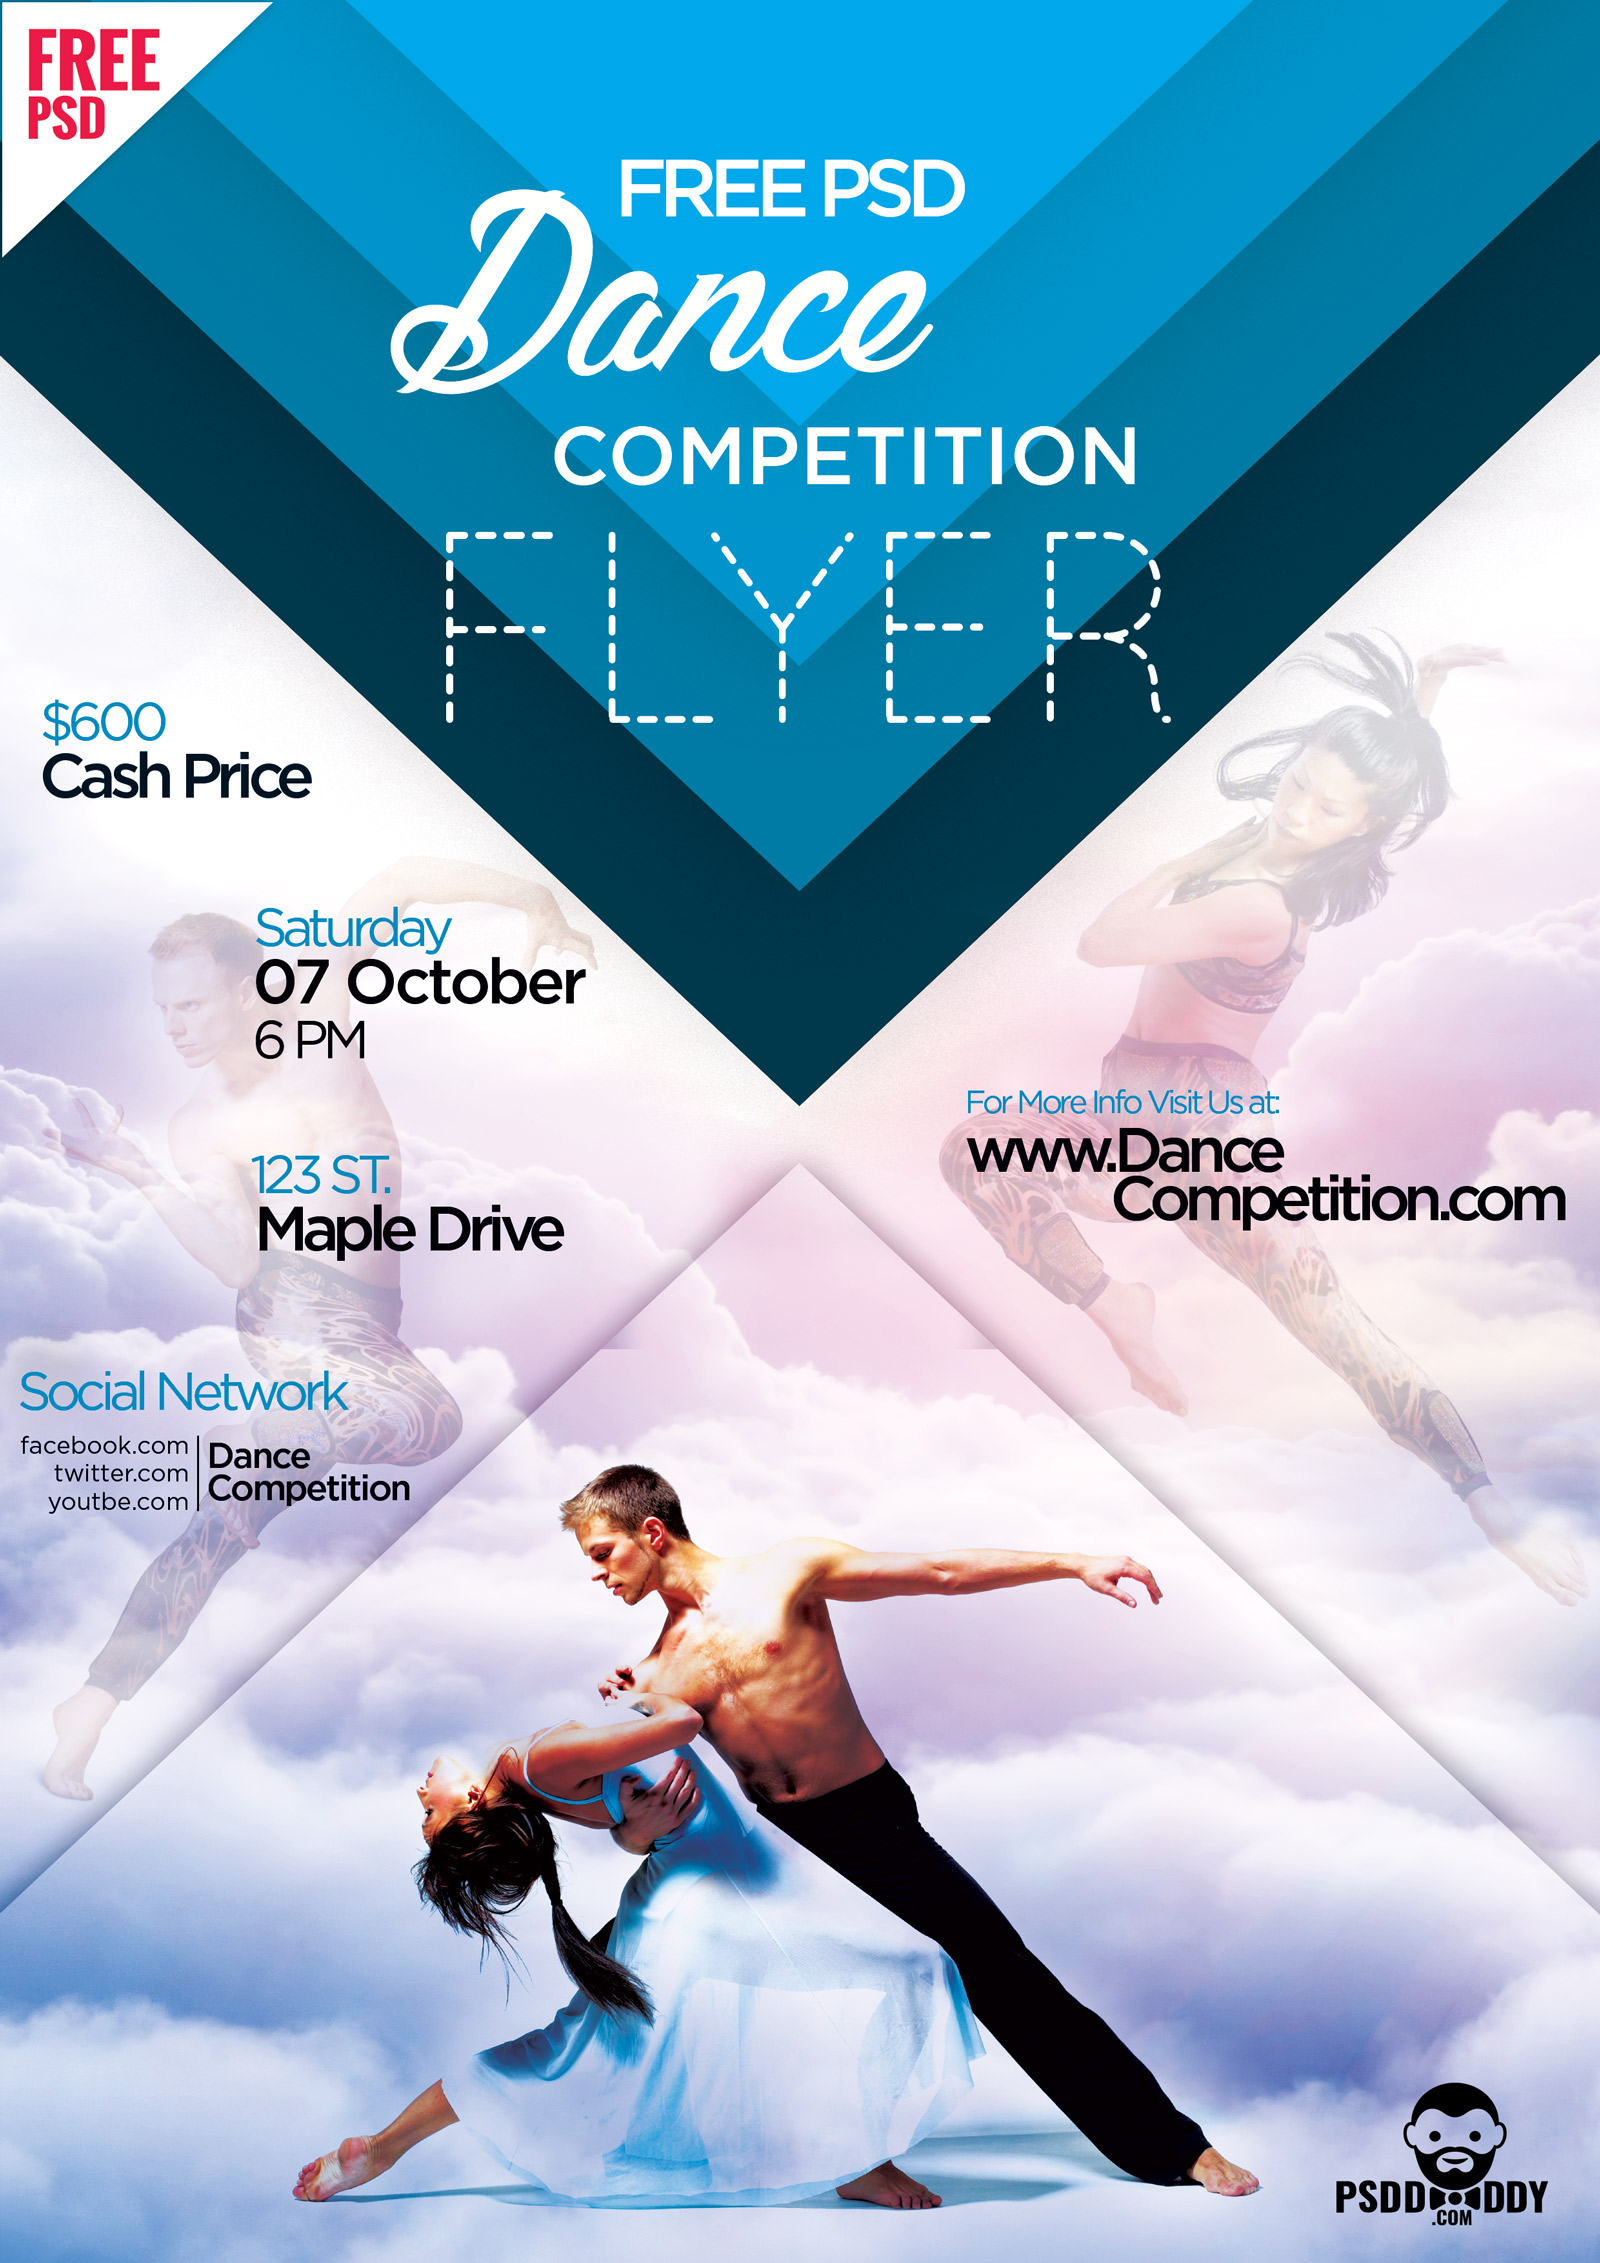 [Download] Dance Competition Flyer PSD